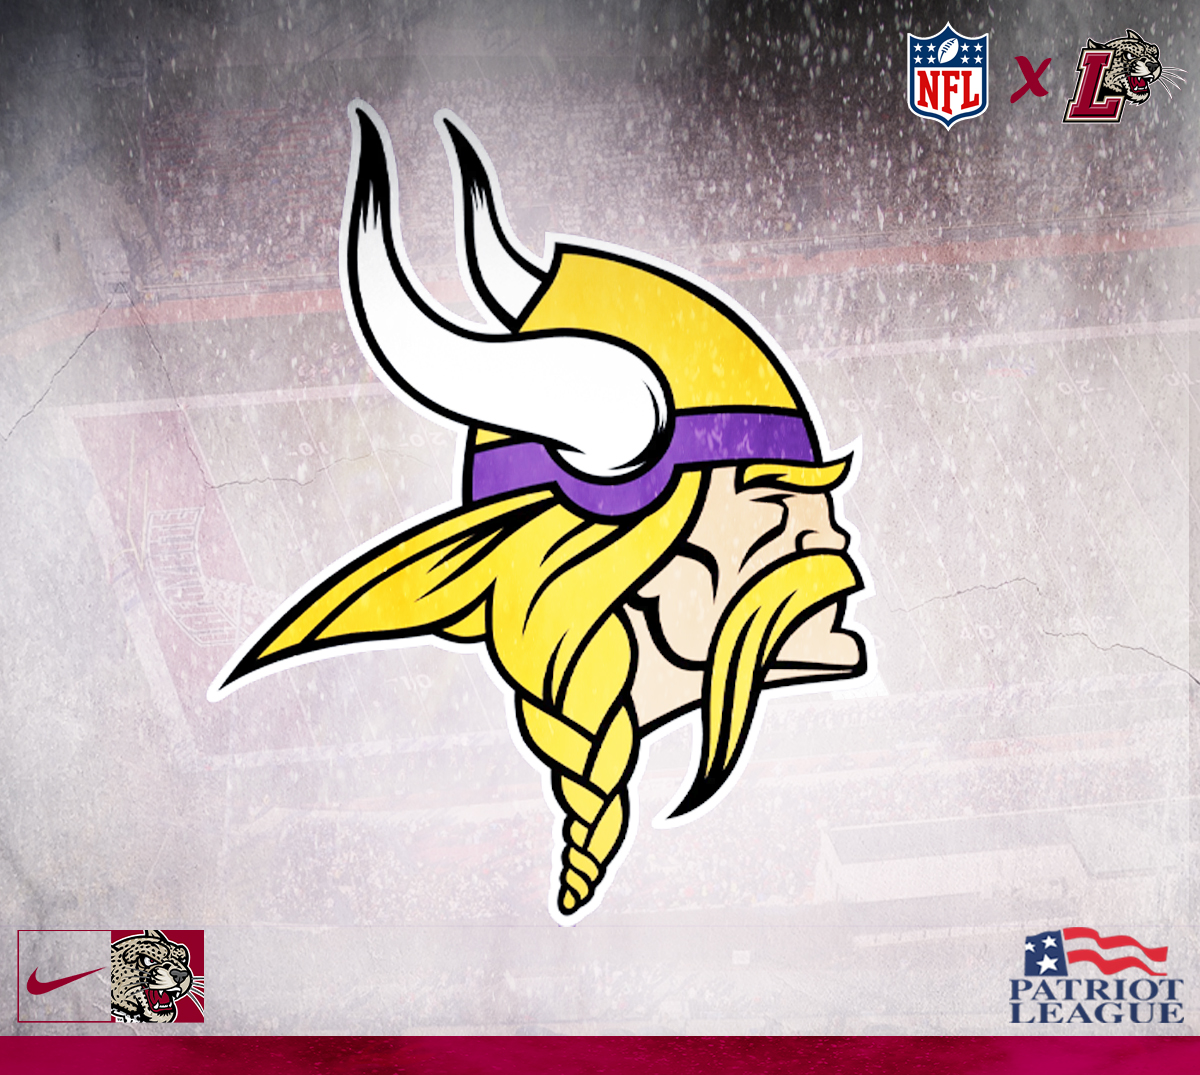 Thanks to the @Vikings for stopping by the facility last night!! #CLIMBTHEHILL